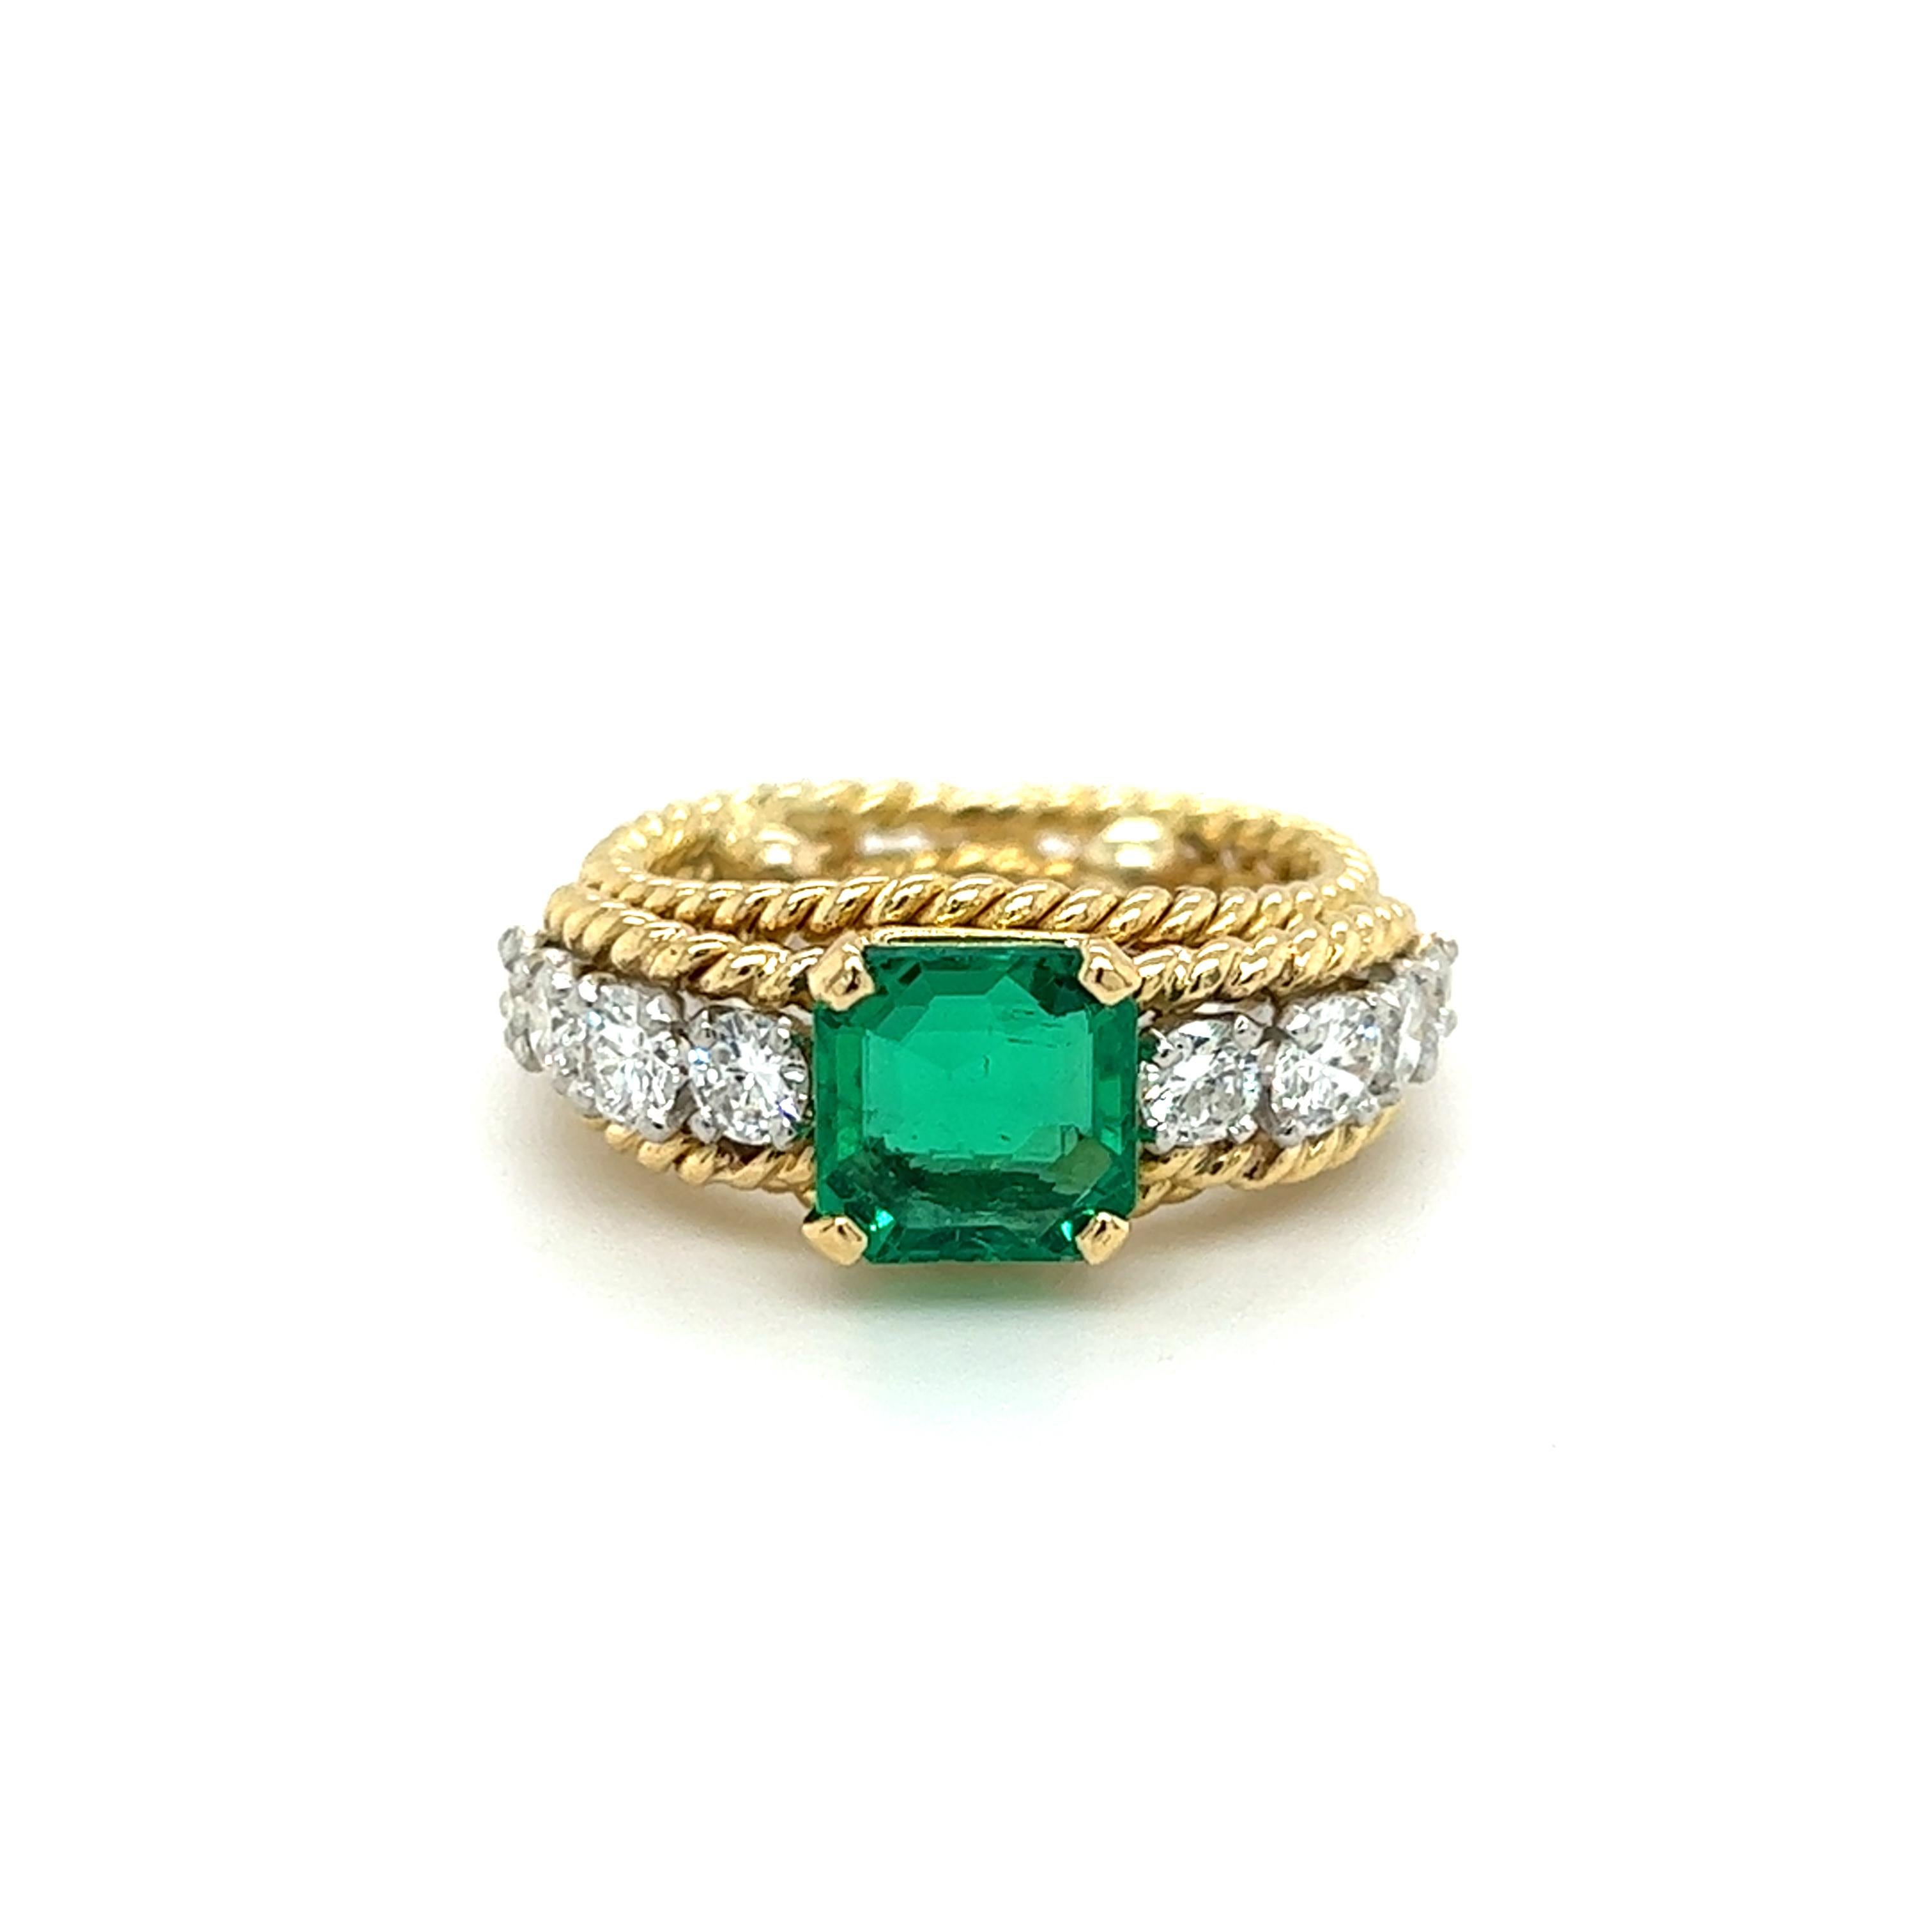 One 1970s 18 karat yellow and white gold rope style ring set with one (1) 2.77 carat square emerald cut emerald, and eight (8) round brilliant cut diamonds, approximately 0.75 carat total weight with matching H/I color and SI1 clarity. The ring